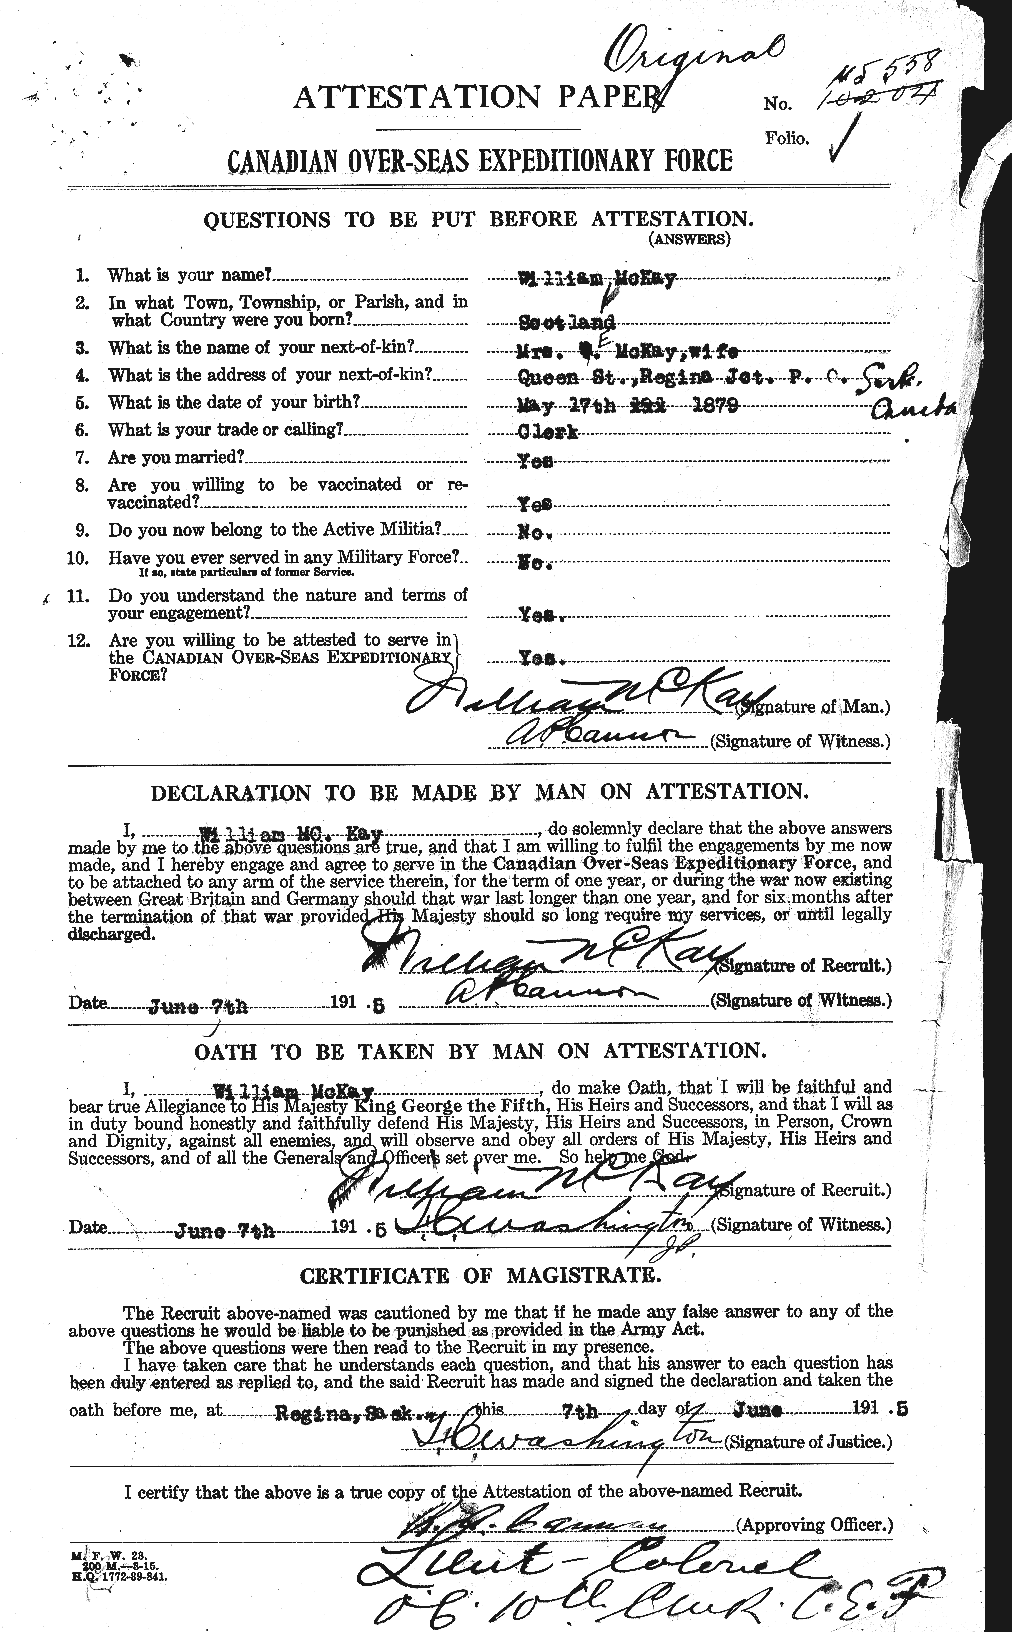 Personnel Records of the First World War - CEF 530218a